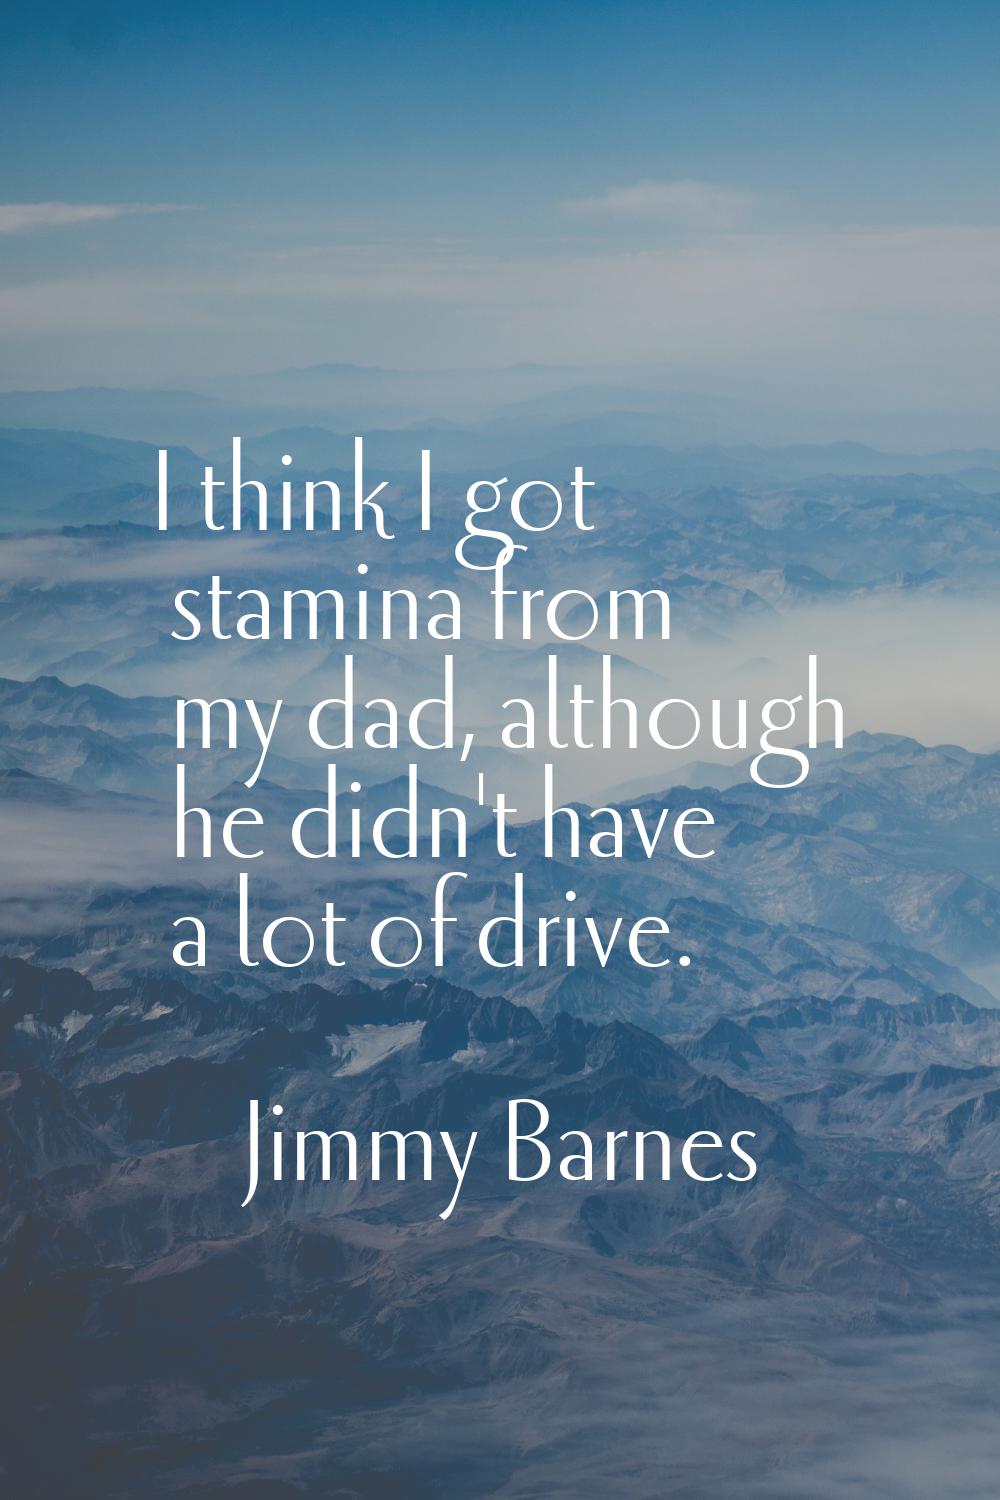 I think I got stamina from my dad, although he didn't have a lot of drive.